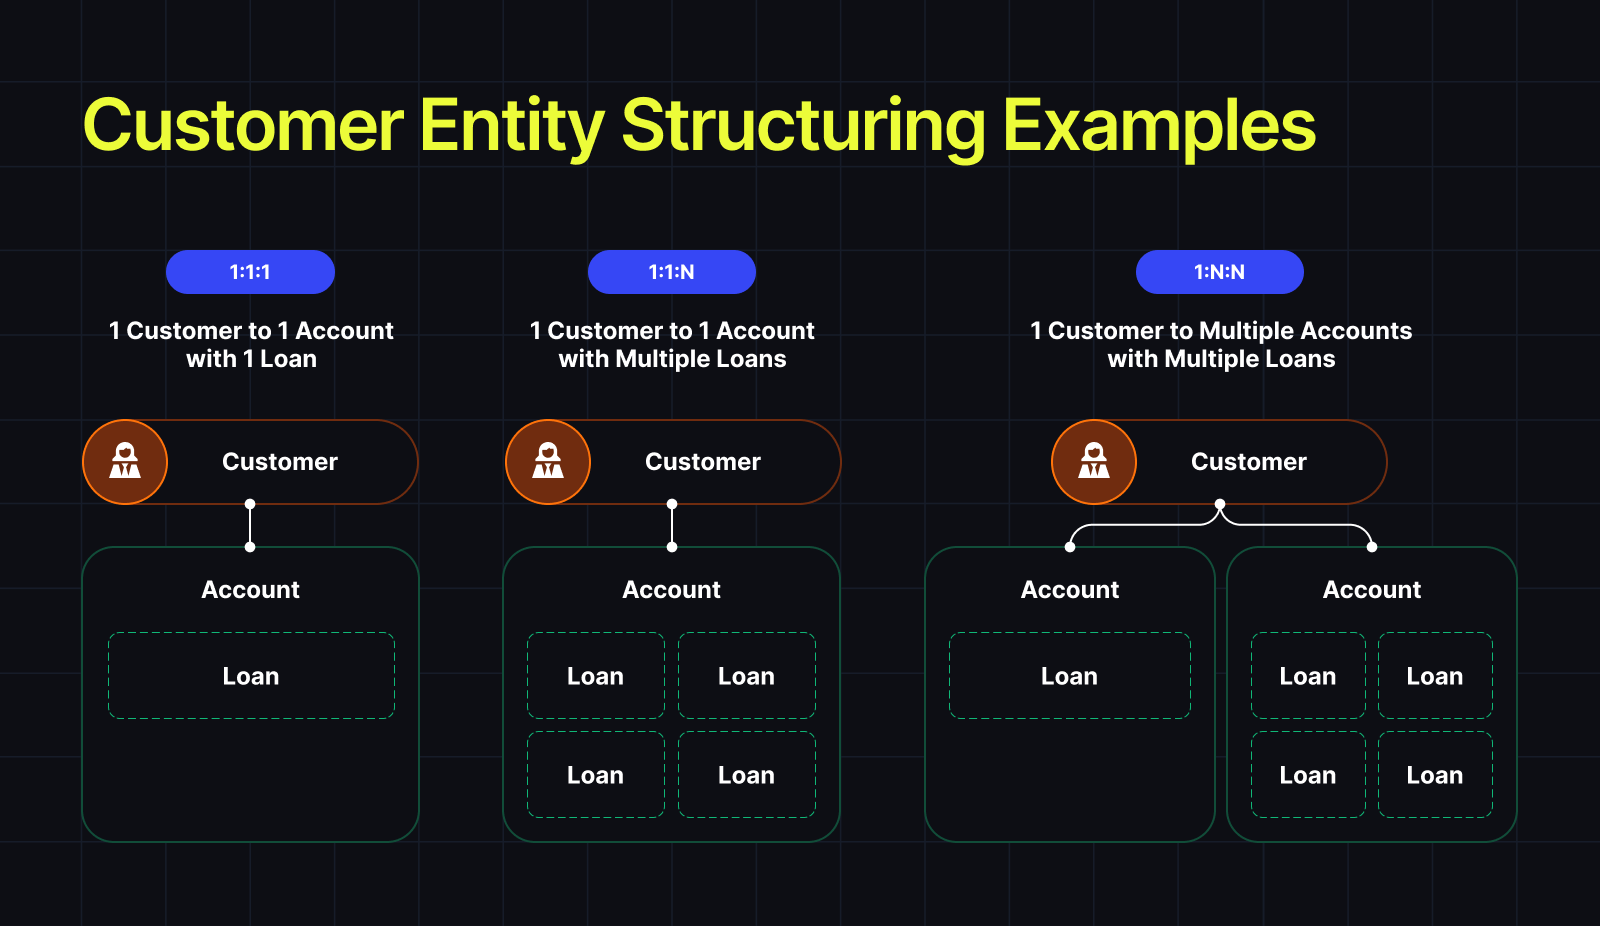 Customer Structuring Examples: The different account structures Canopy supports